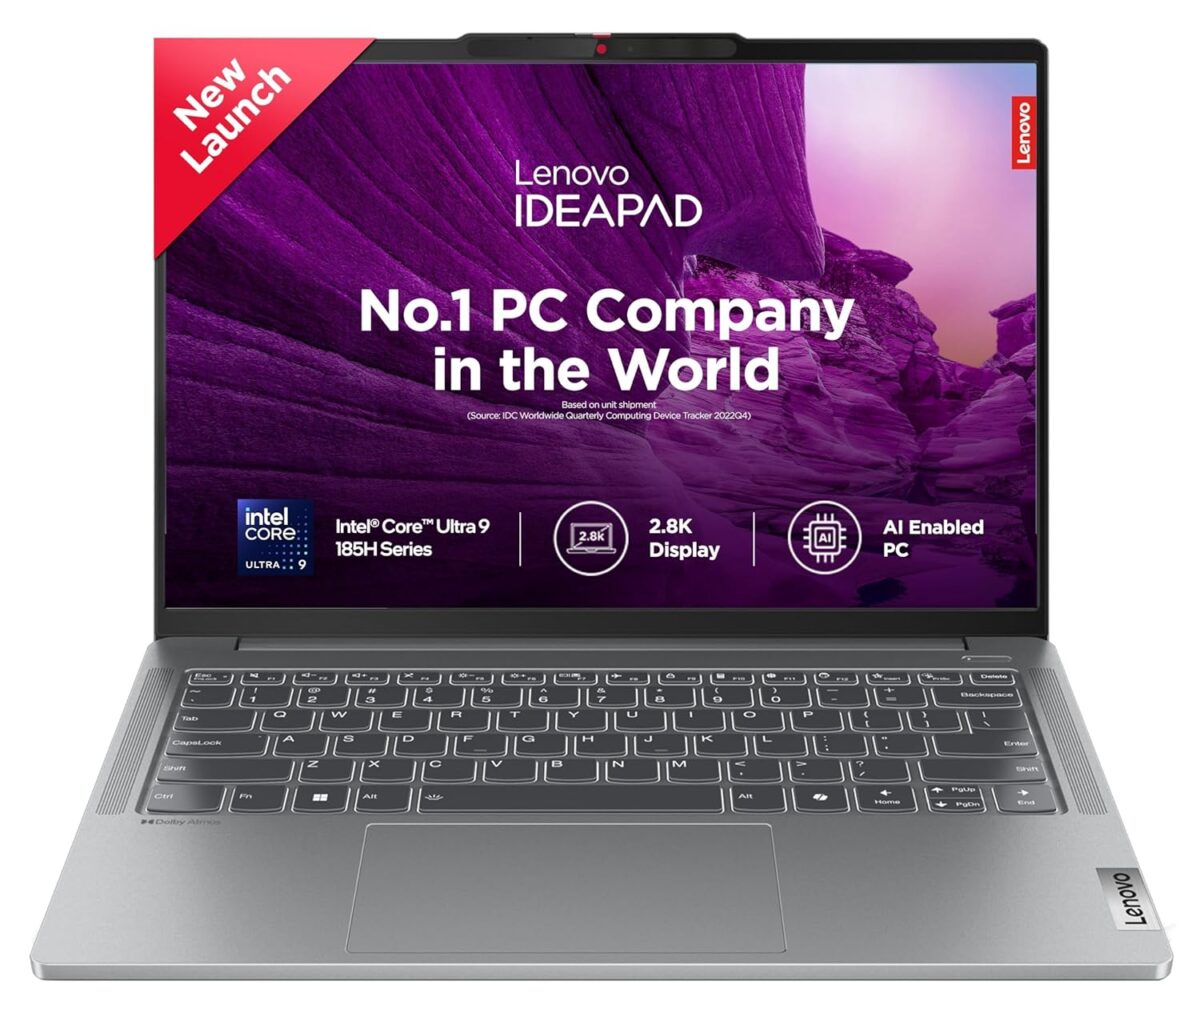 Lenovo IdeaPad Pro 5 83D2001GIN Specs Price and Availability | Intel Core Ultra 9 185H OLED Laptop